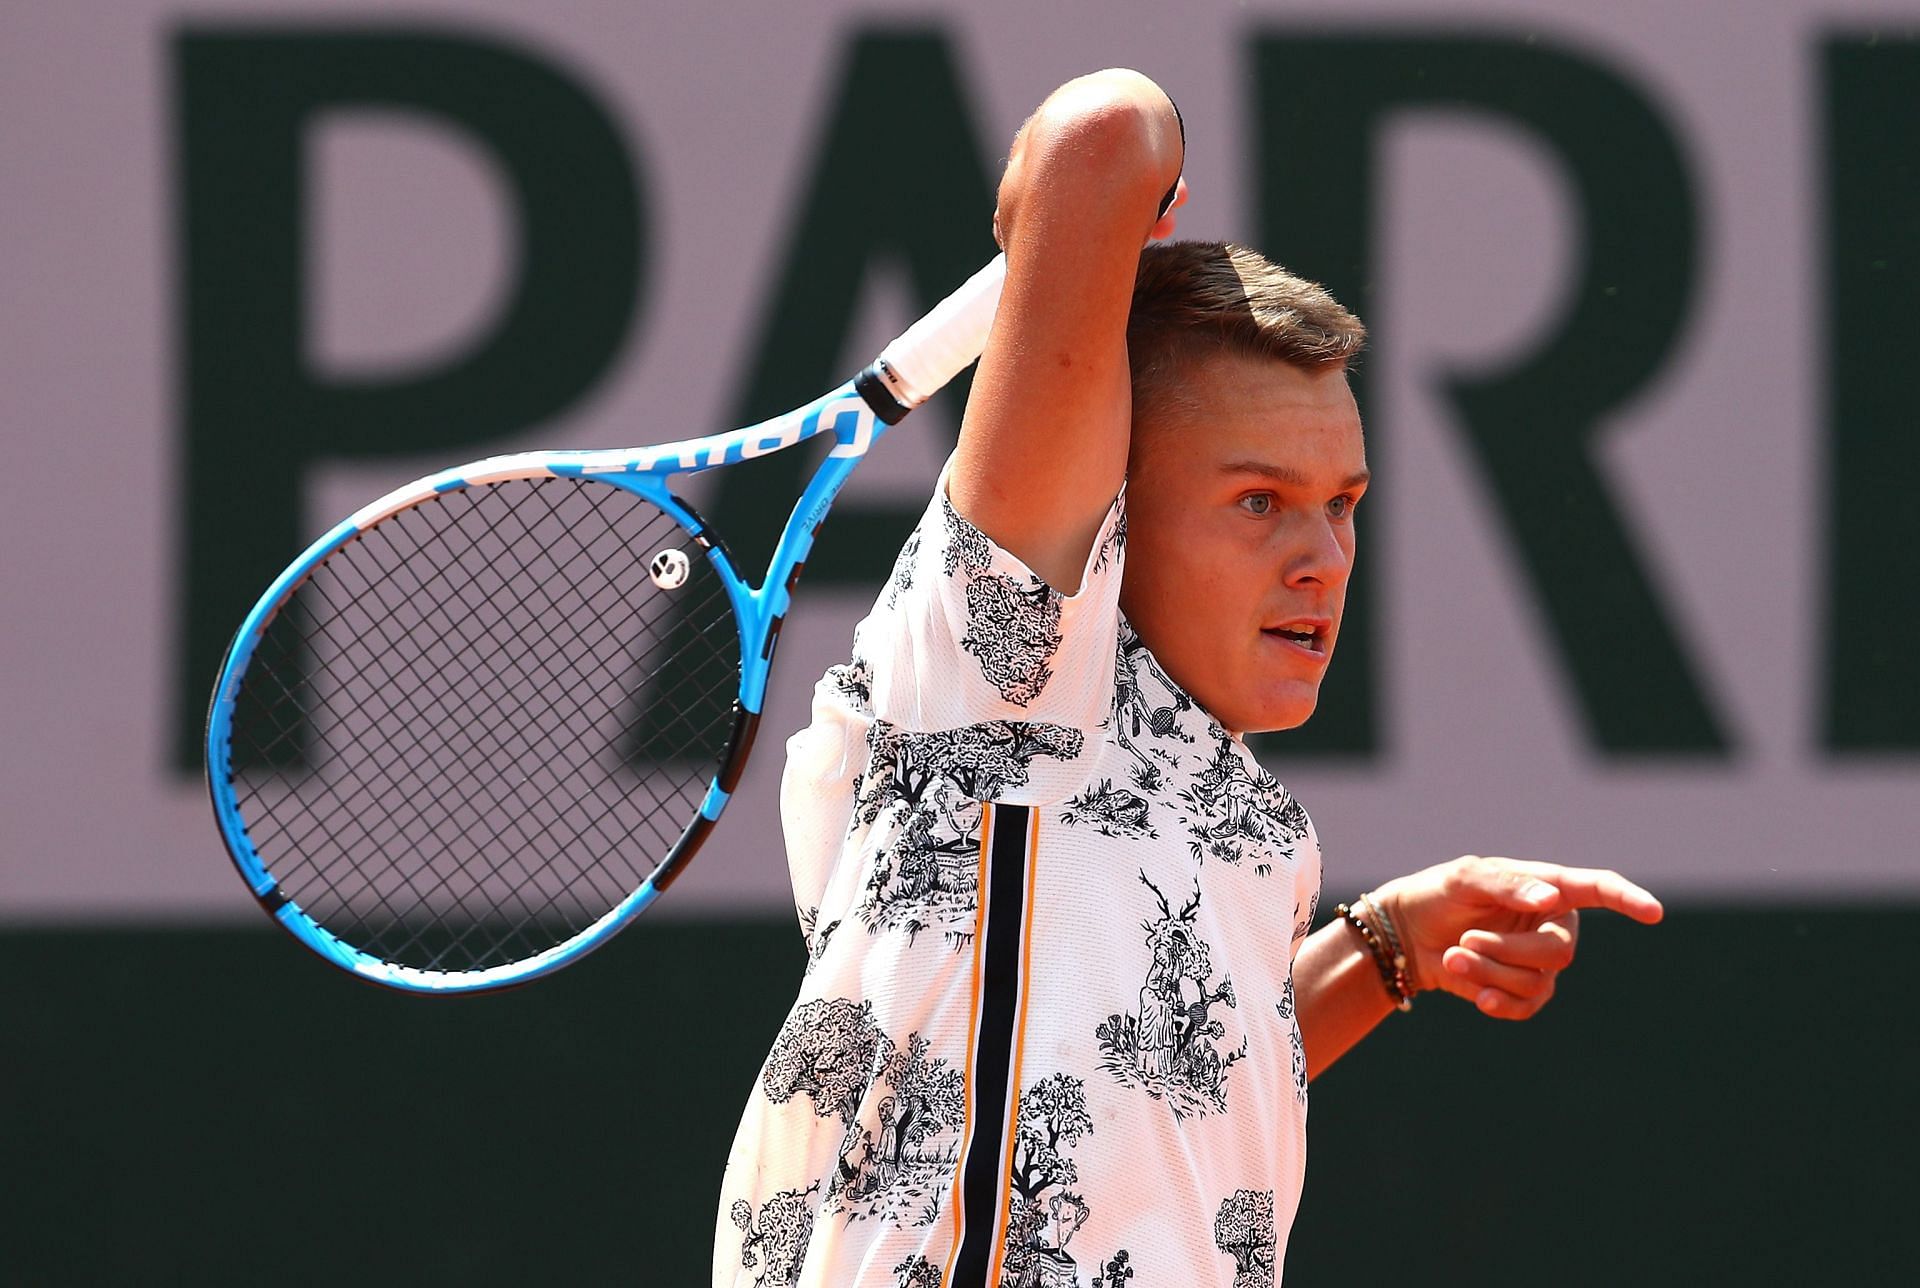 Holger Rune at the 2019 French Open.